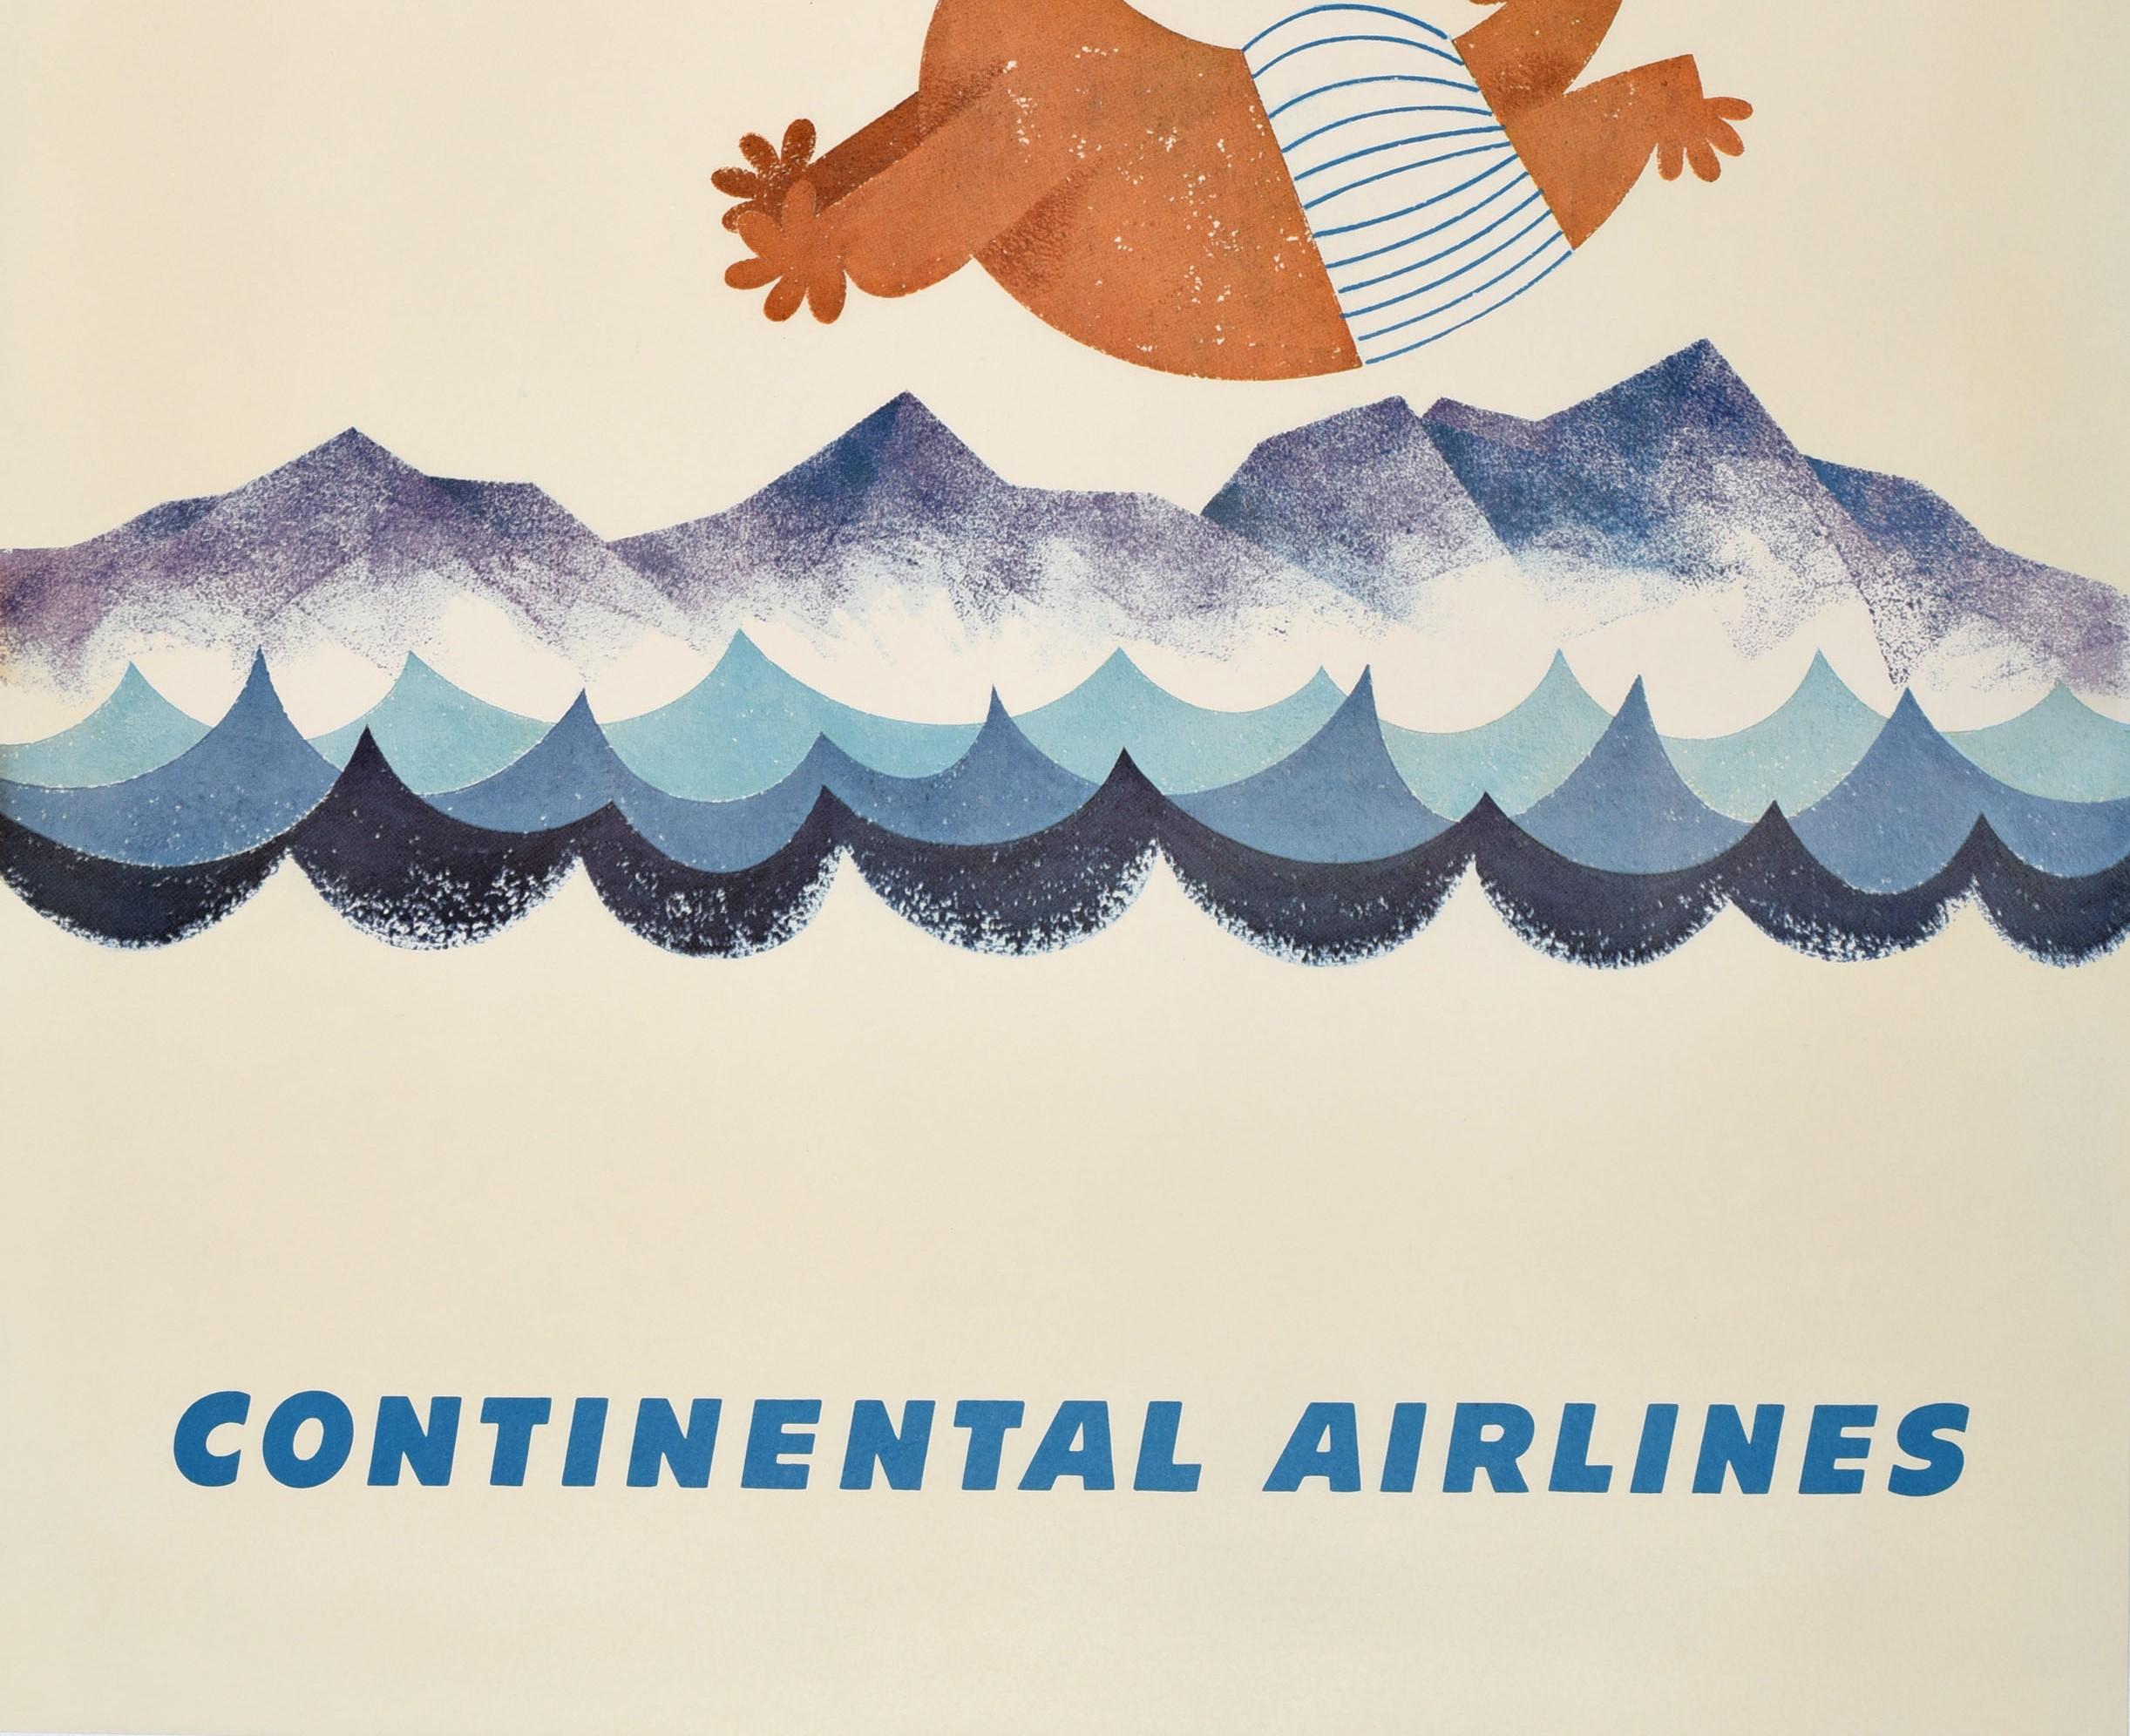 Original vintage travel poster - California Continental Airlines - featuring a fun design depicting a smiling orange sun headed character wearing a purple beret hat, sunglasses and striped shorts, smoking a cigarette with a cigarette holder while